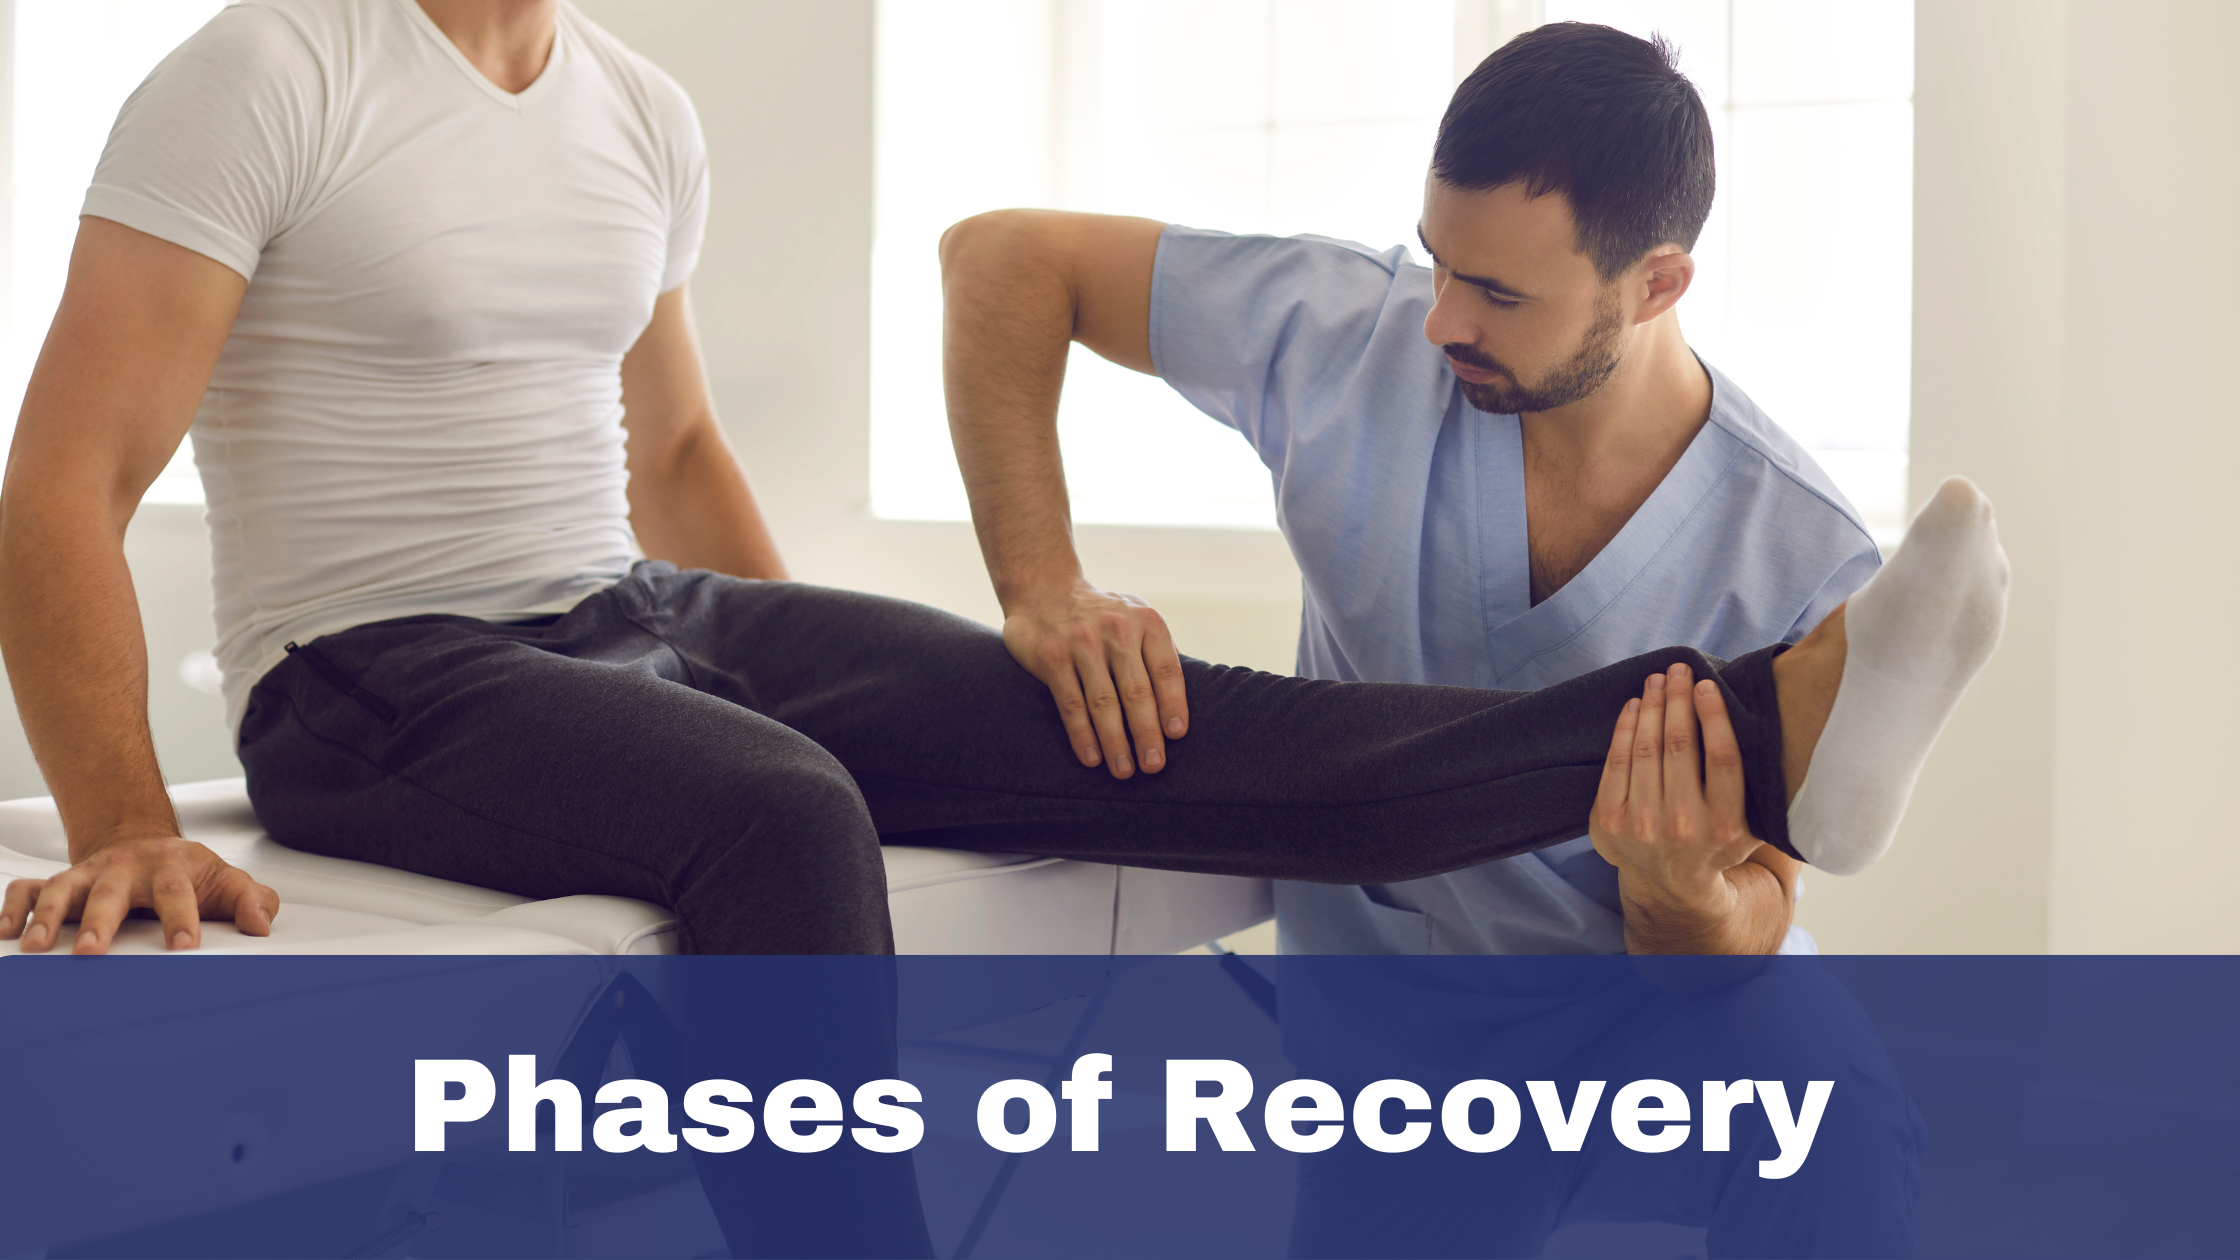 Phases of Recovery